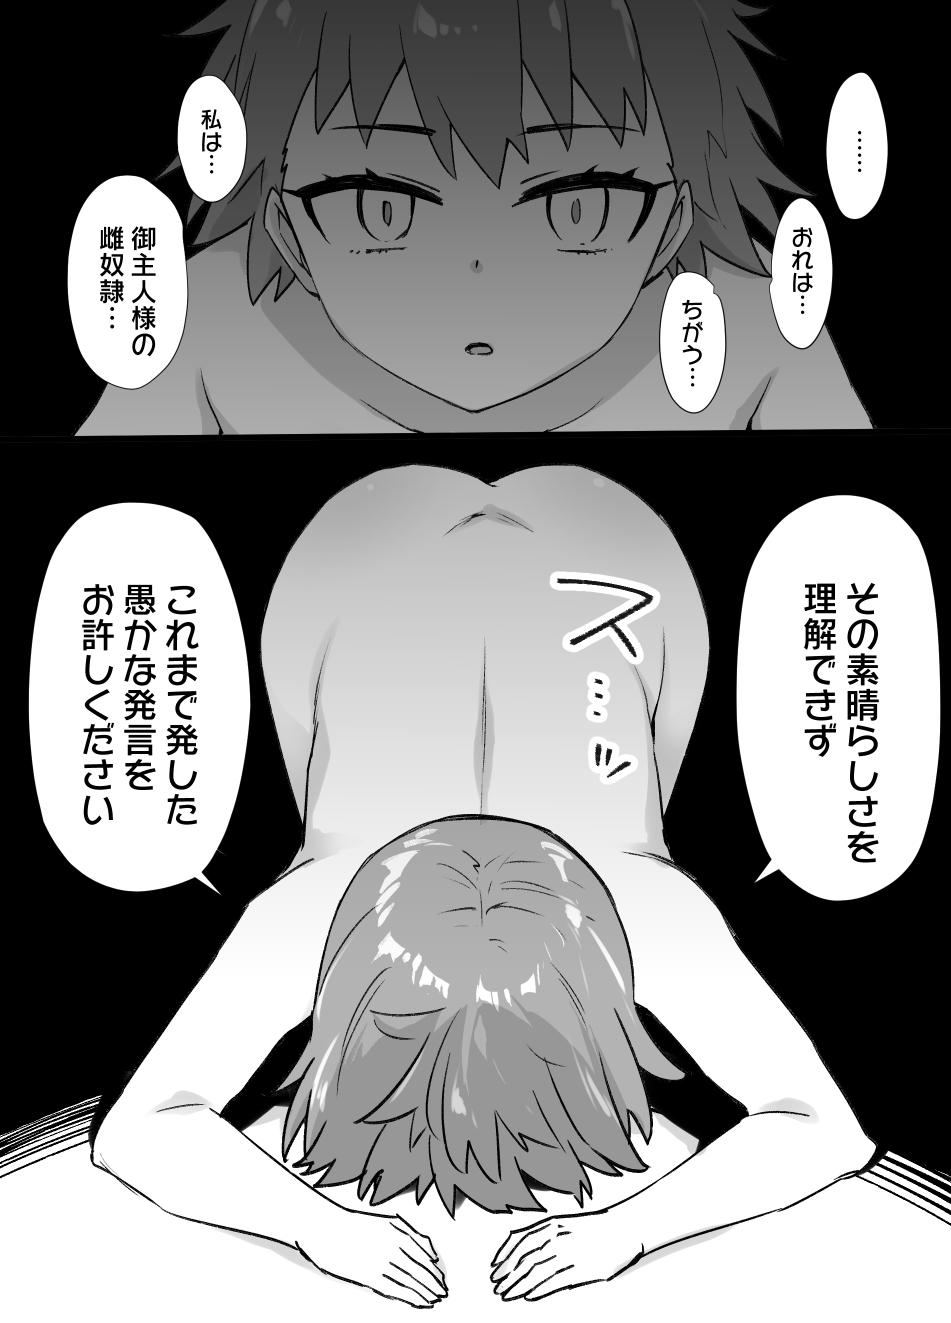 Ginger A manga about Shirou Emiya who went to save Rin Tohsaka from captivity and is transformed into a female slave through physical feminization and brainwashing[Fate/ stay night) - Fate stay night Pattaya - Page 6